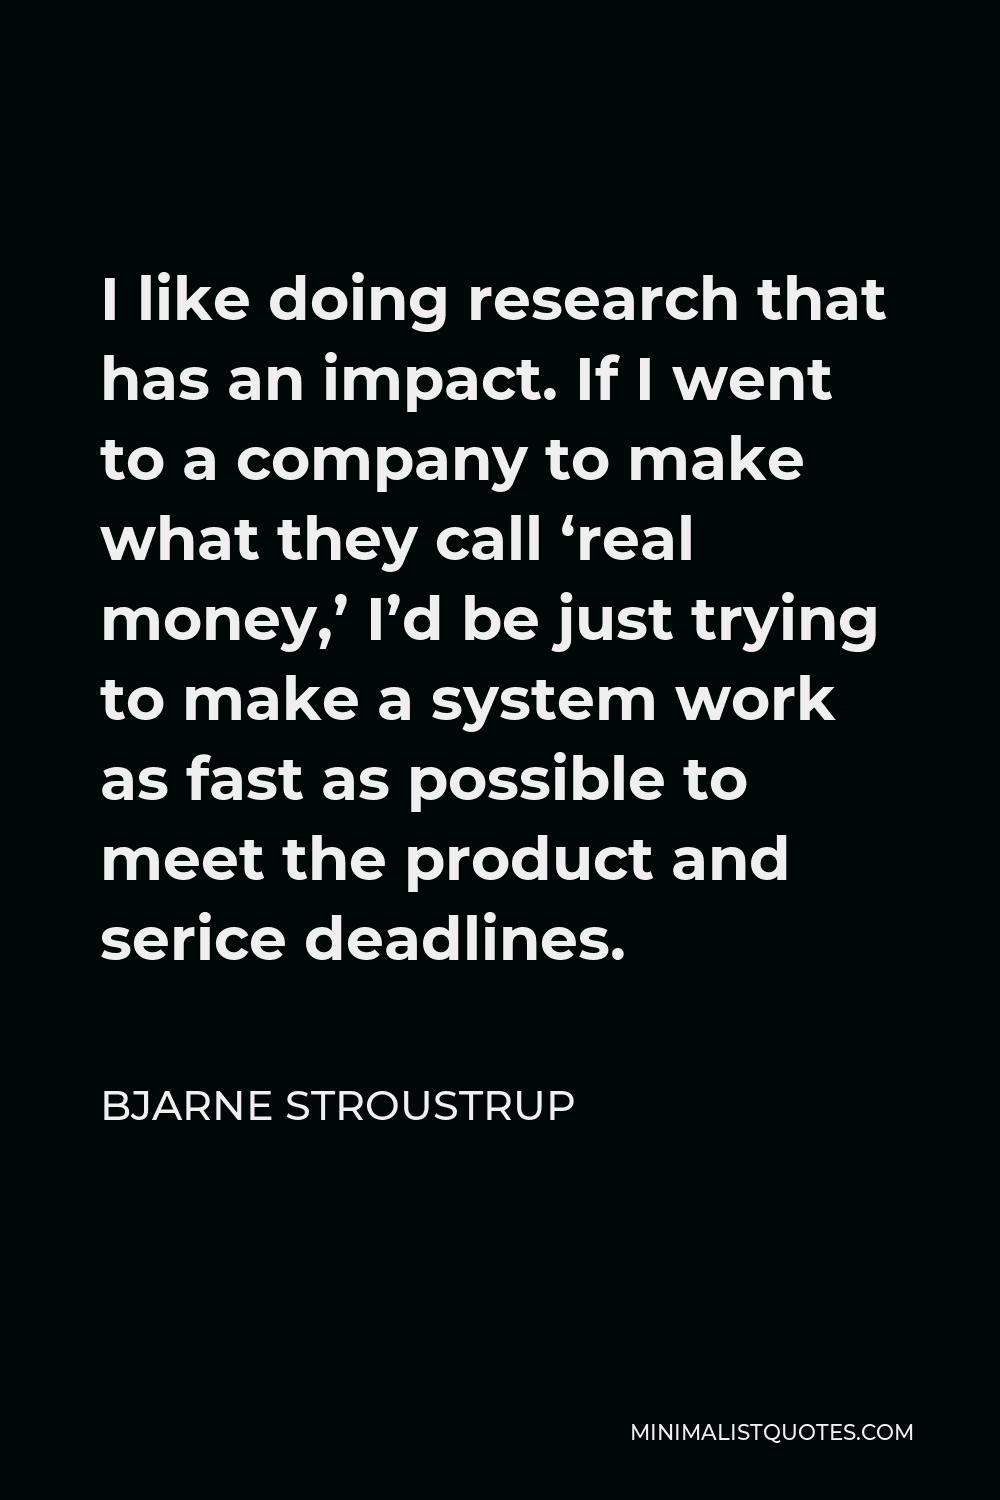 Bjarne Stroustrup Quote - I like doing research that has an impact. If I went to a company to make what they call ‘real money,’ I’d be just trying to make a system work as fast as possible to meet the product and serice deadlines.